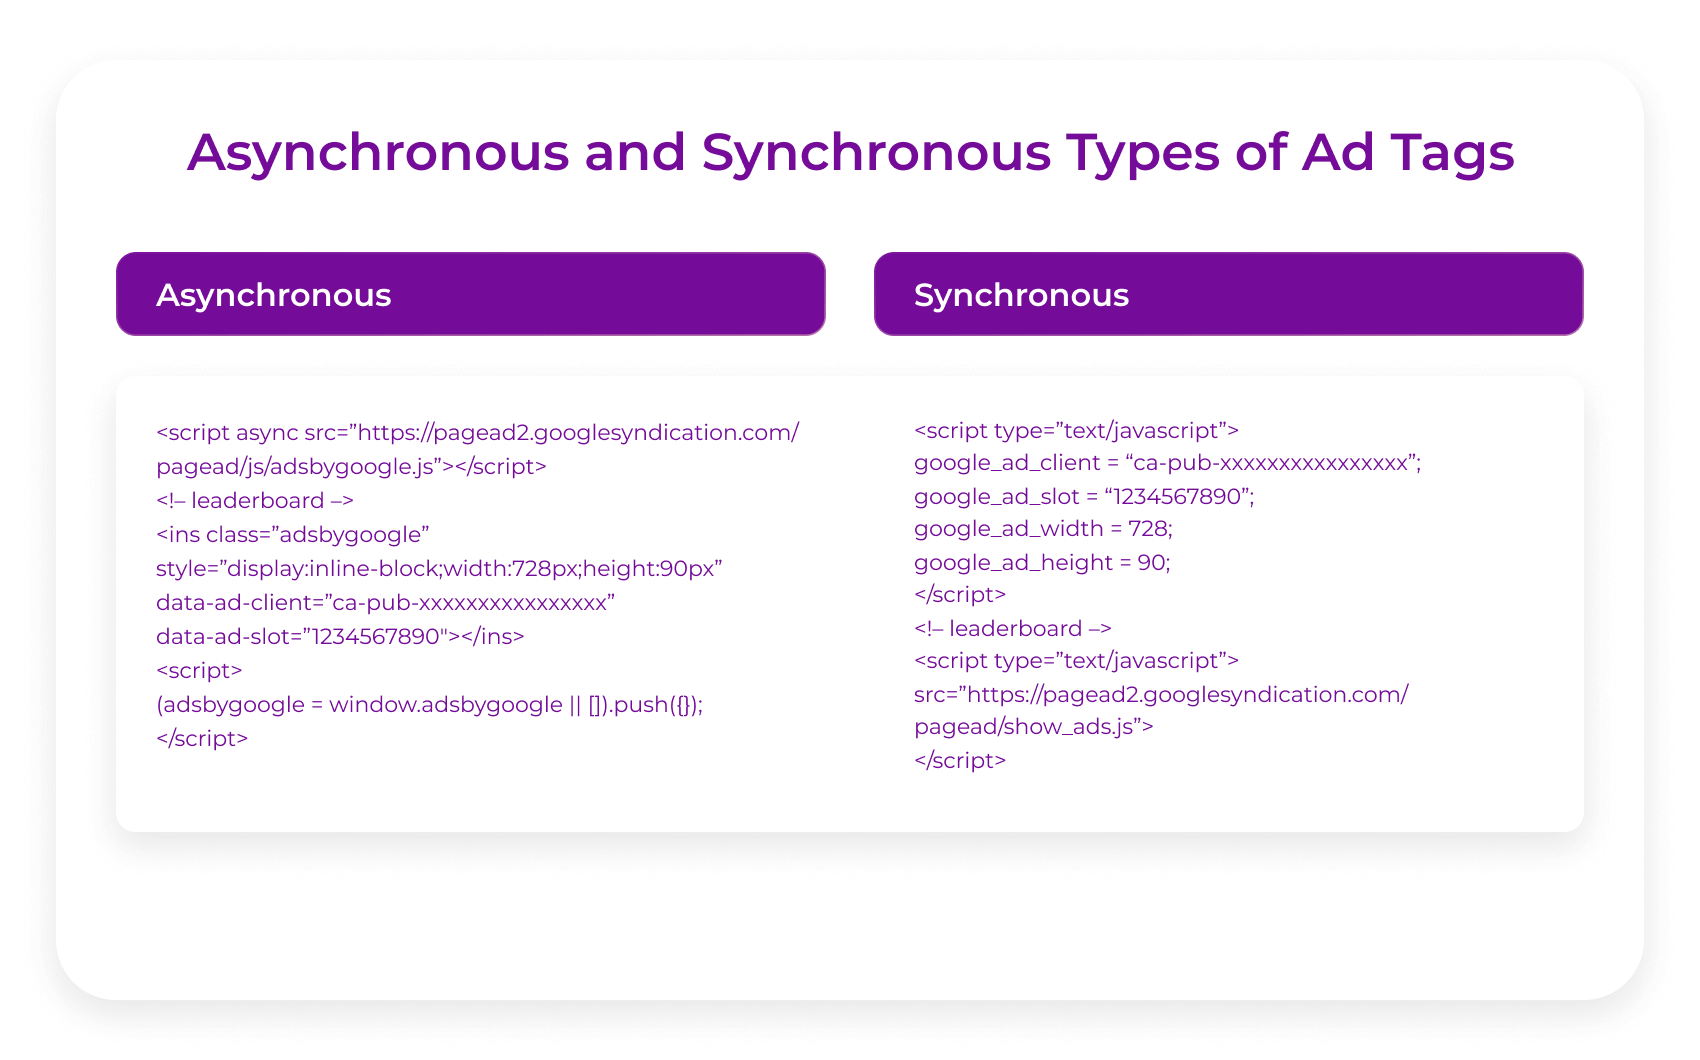 Asynchronous and synchronous types of ad tags